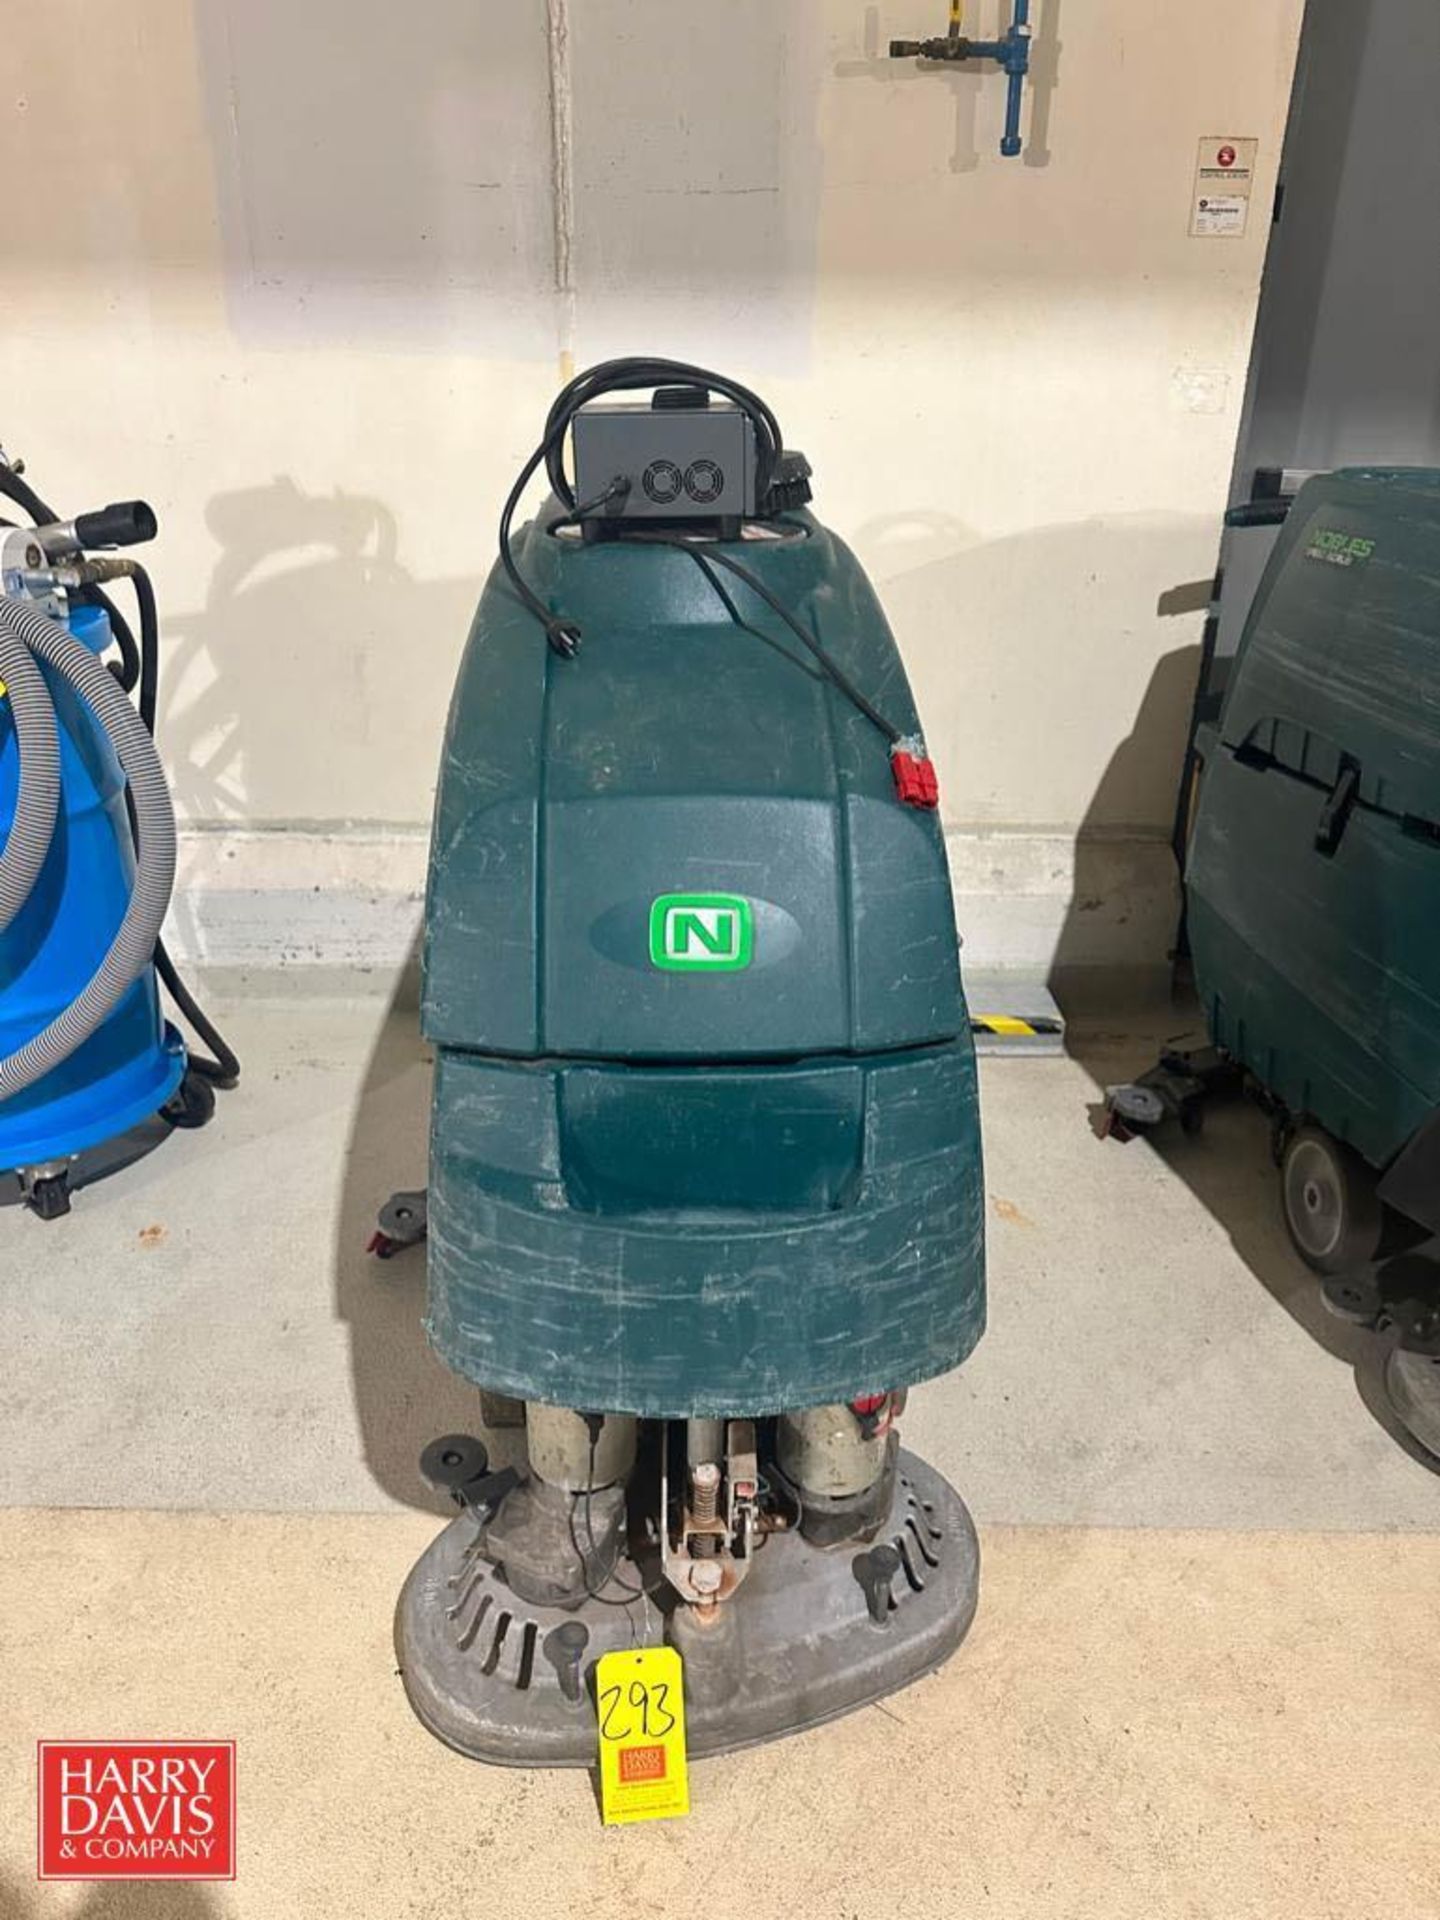 2020 Nobles Speed Scrub Walk Behind Floor Scrubber, Model: HFZ-V4-TN24.20, S/N: 2405884 with Charger